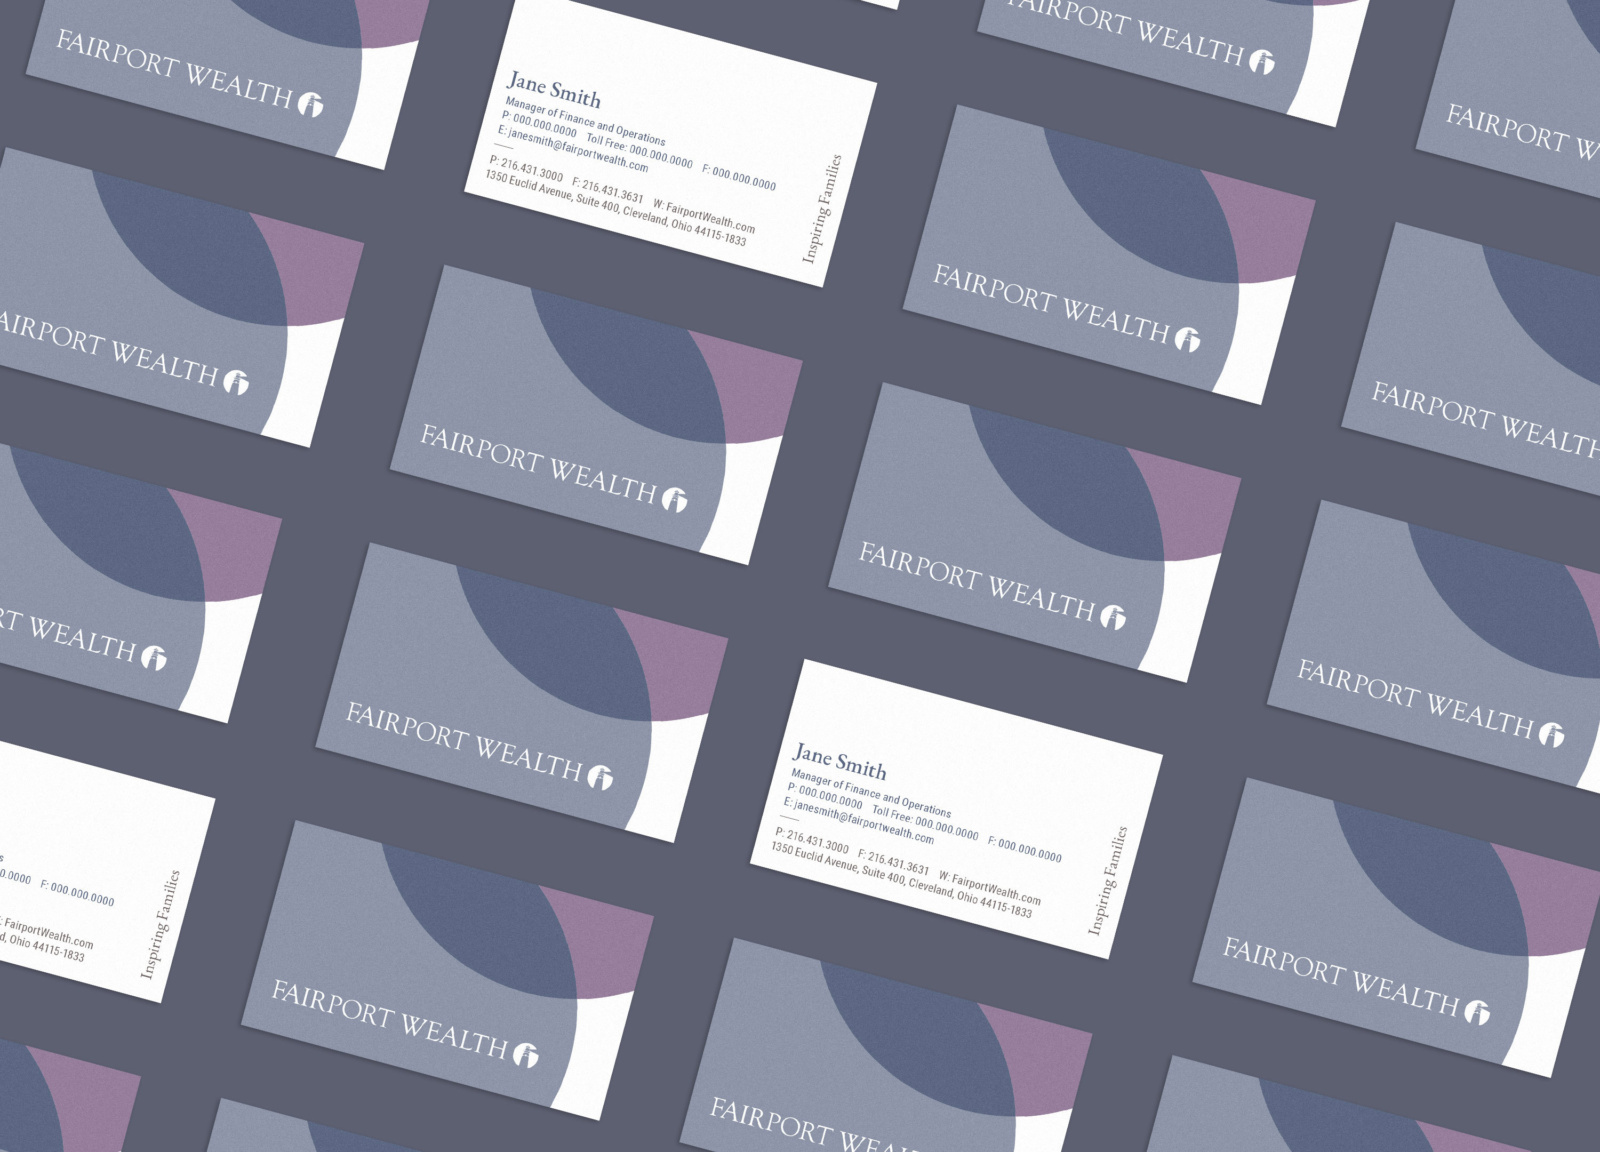 Array of business cards showing new brand design and identity for Fairport Wealth